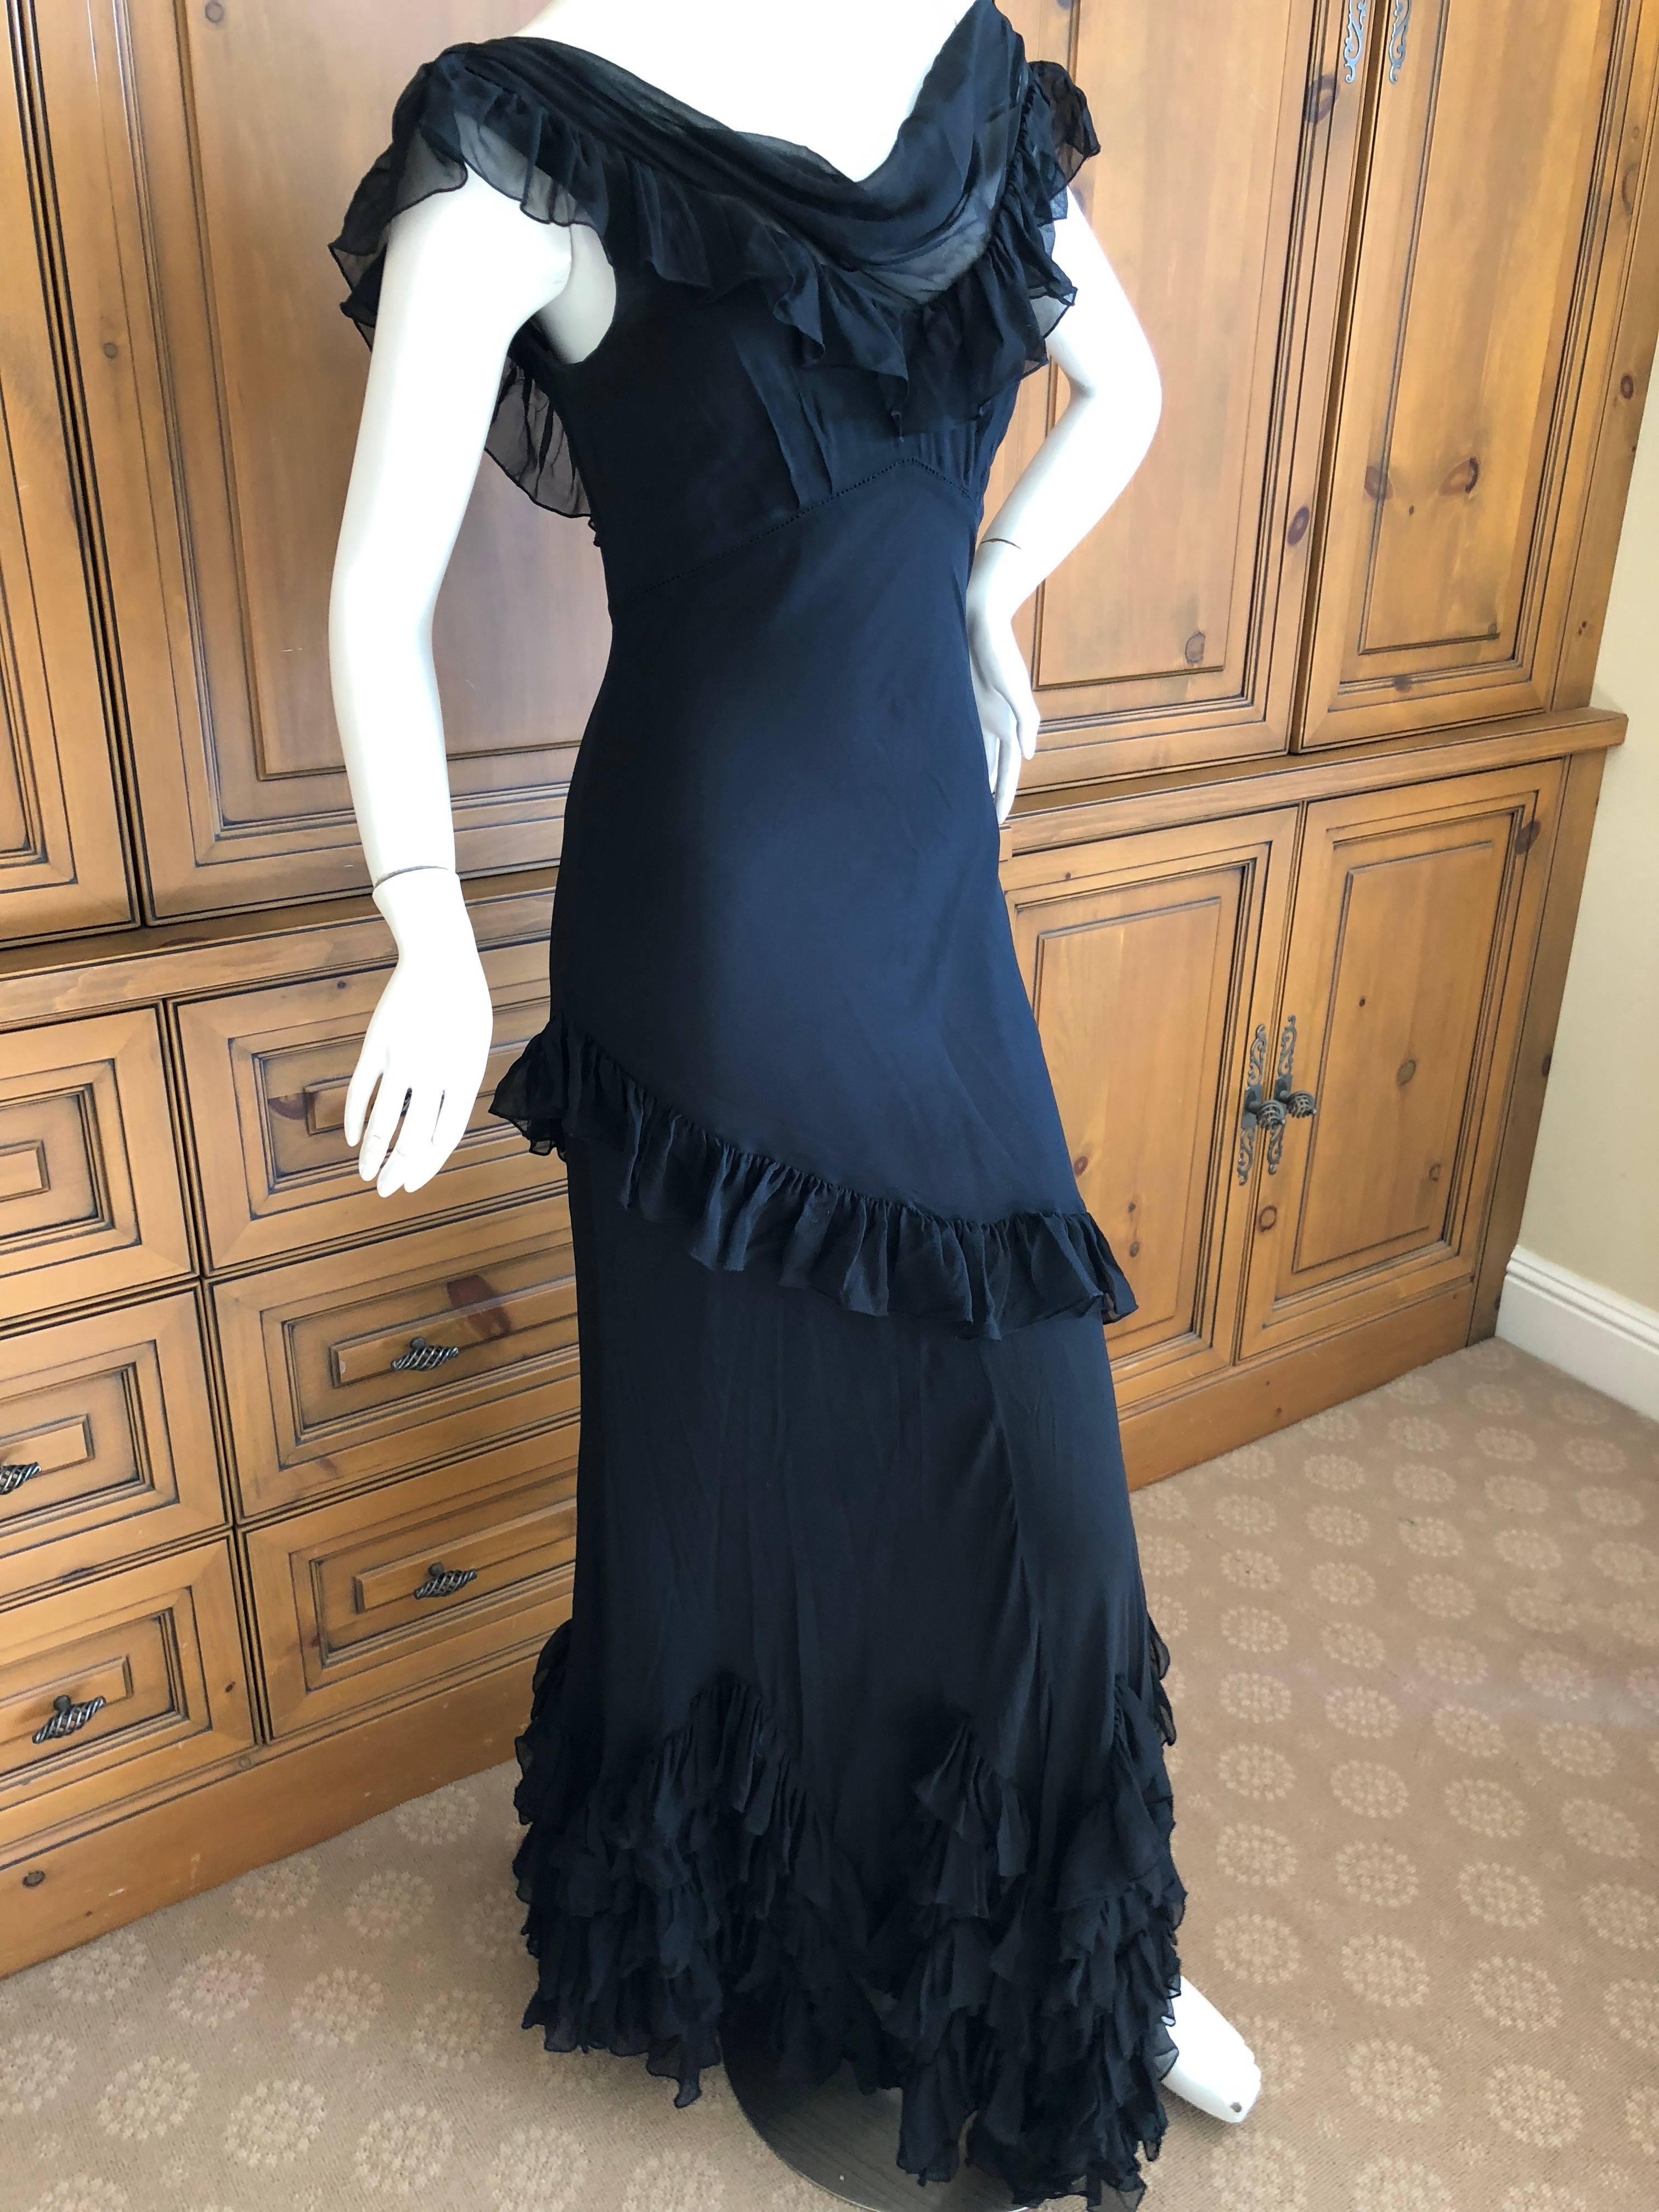  John Galliano Black Sheer Vintage Silk Ruffled Evening Dress with Cowl Back  For Sale 2